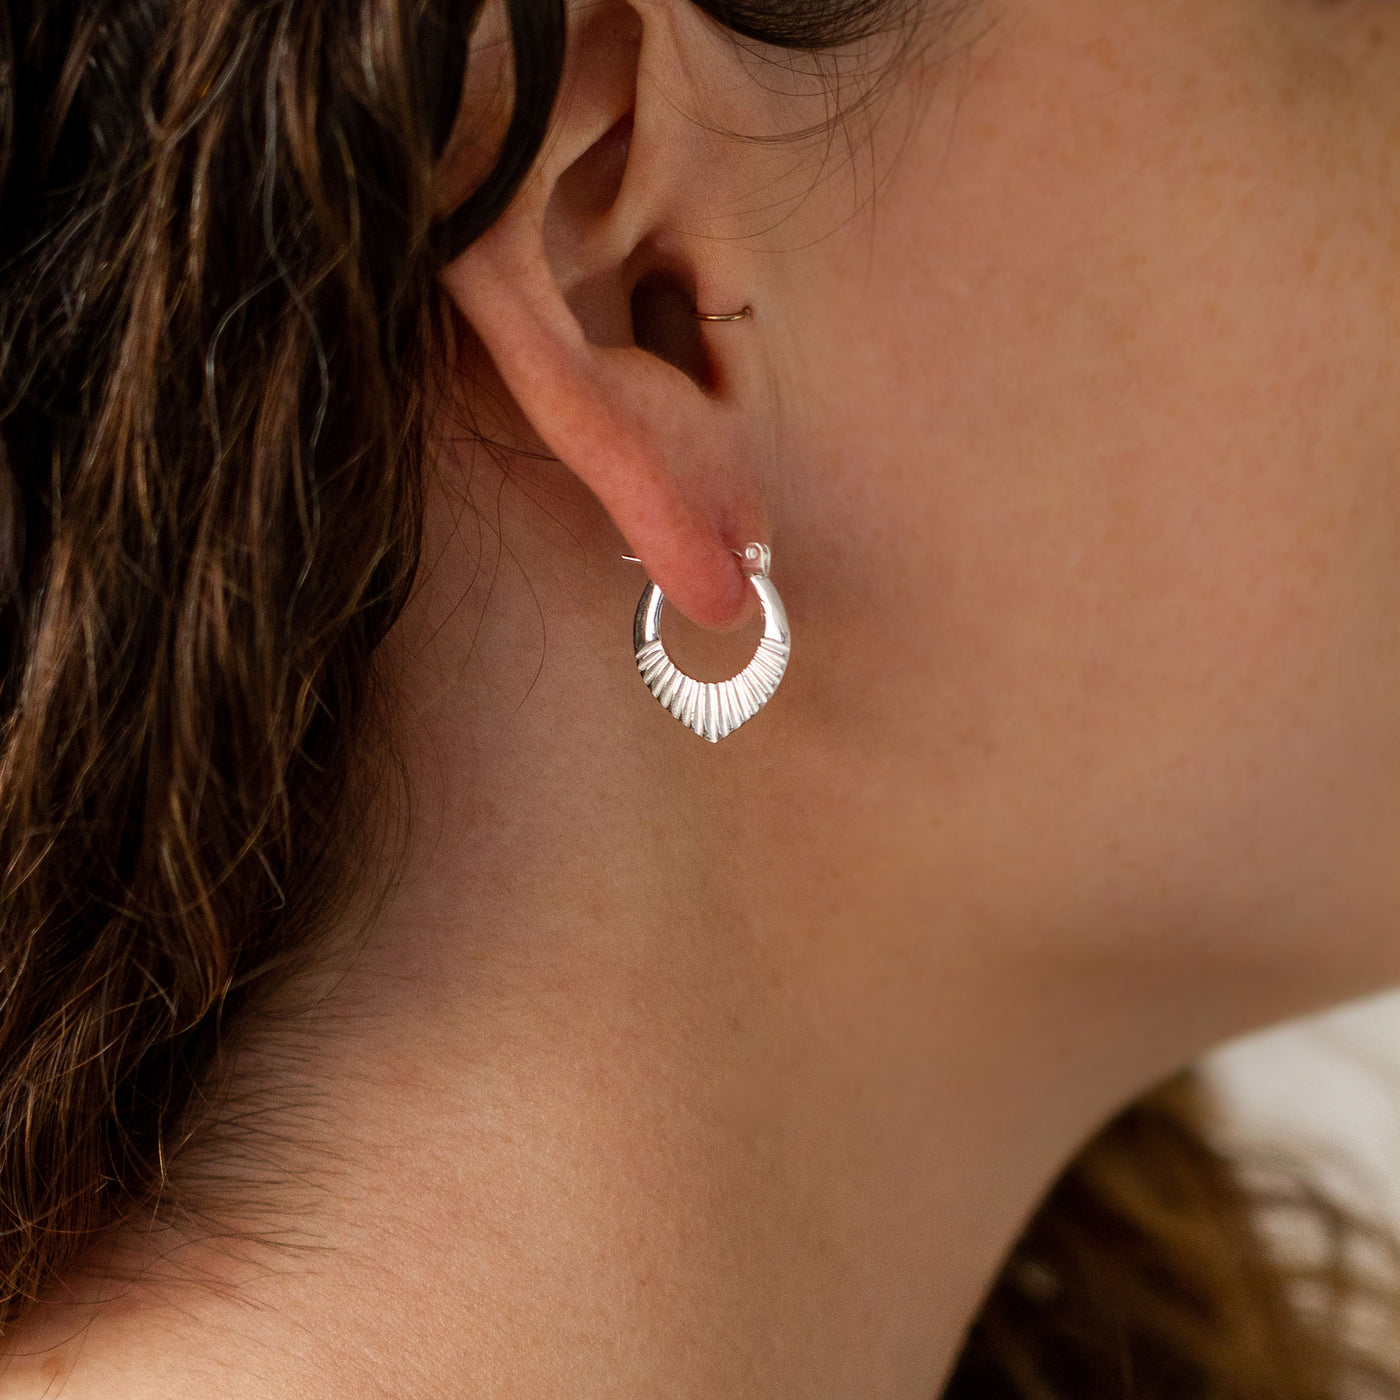 Silver Small Oblong hoops with hinge closure and sunburst bottom by Corey Egan on an ear